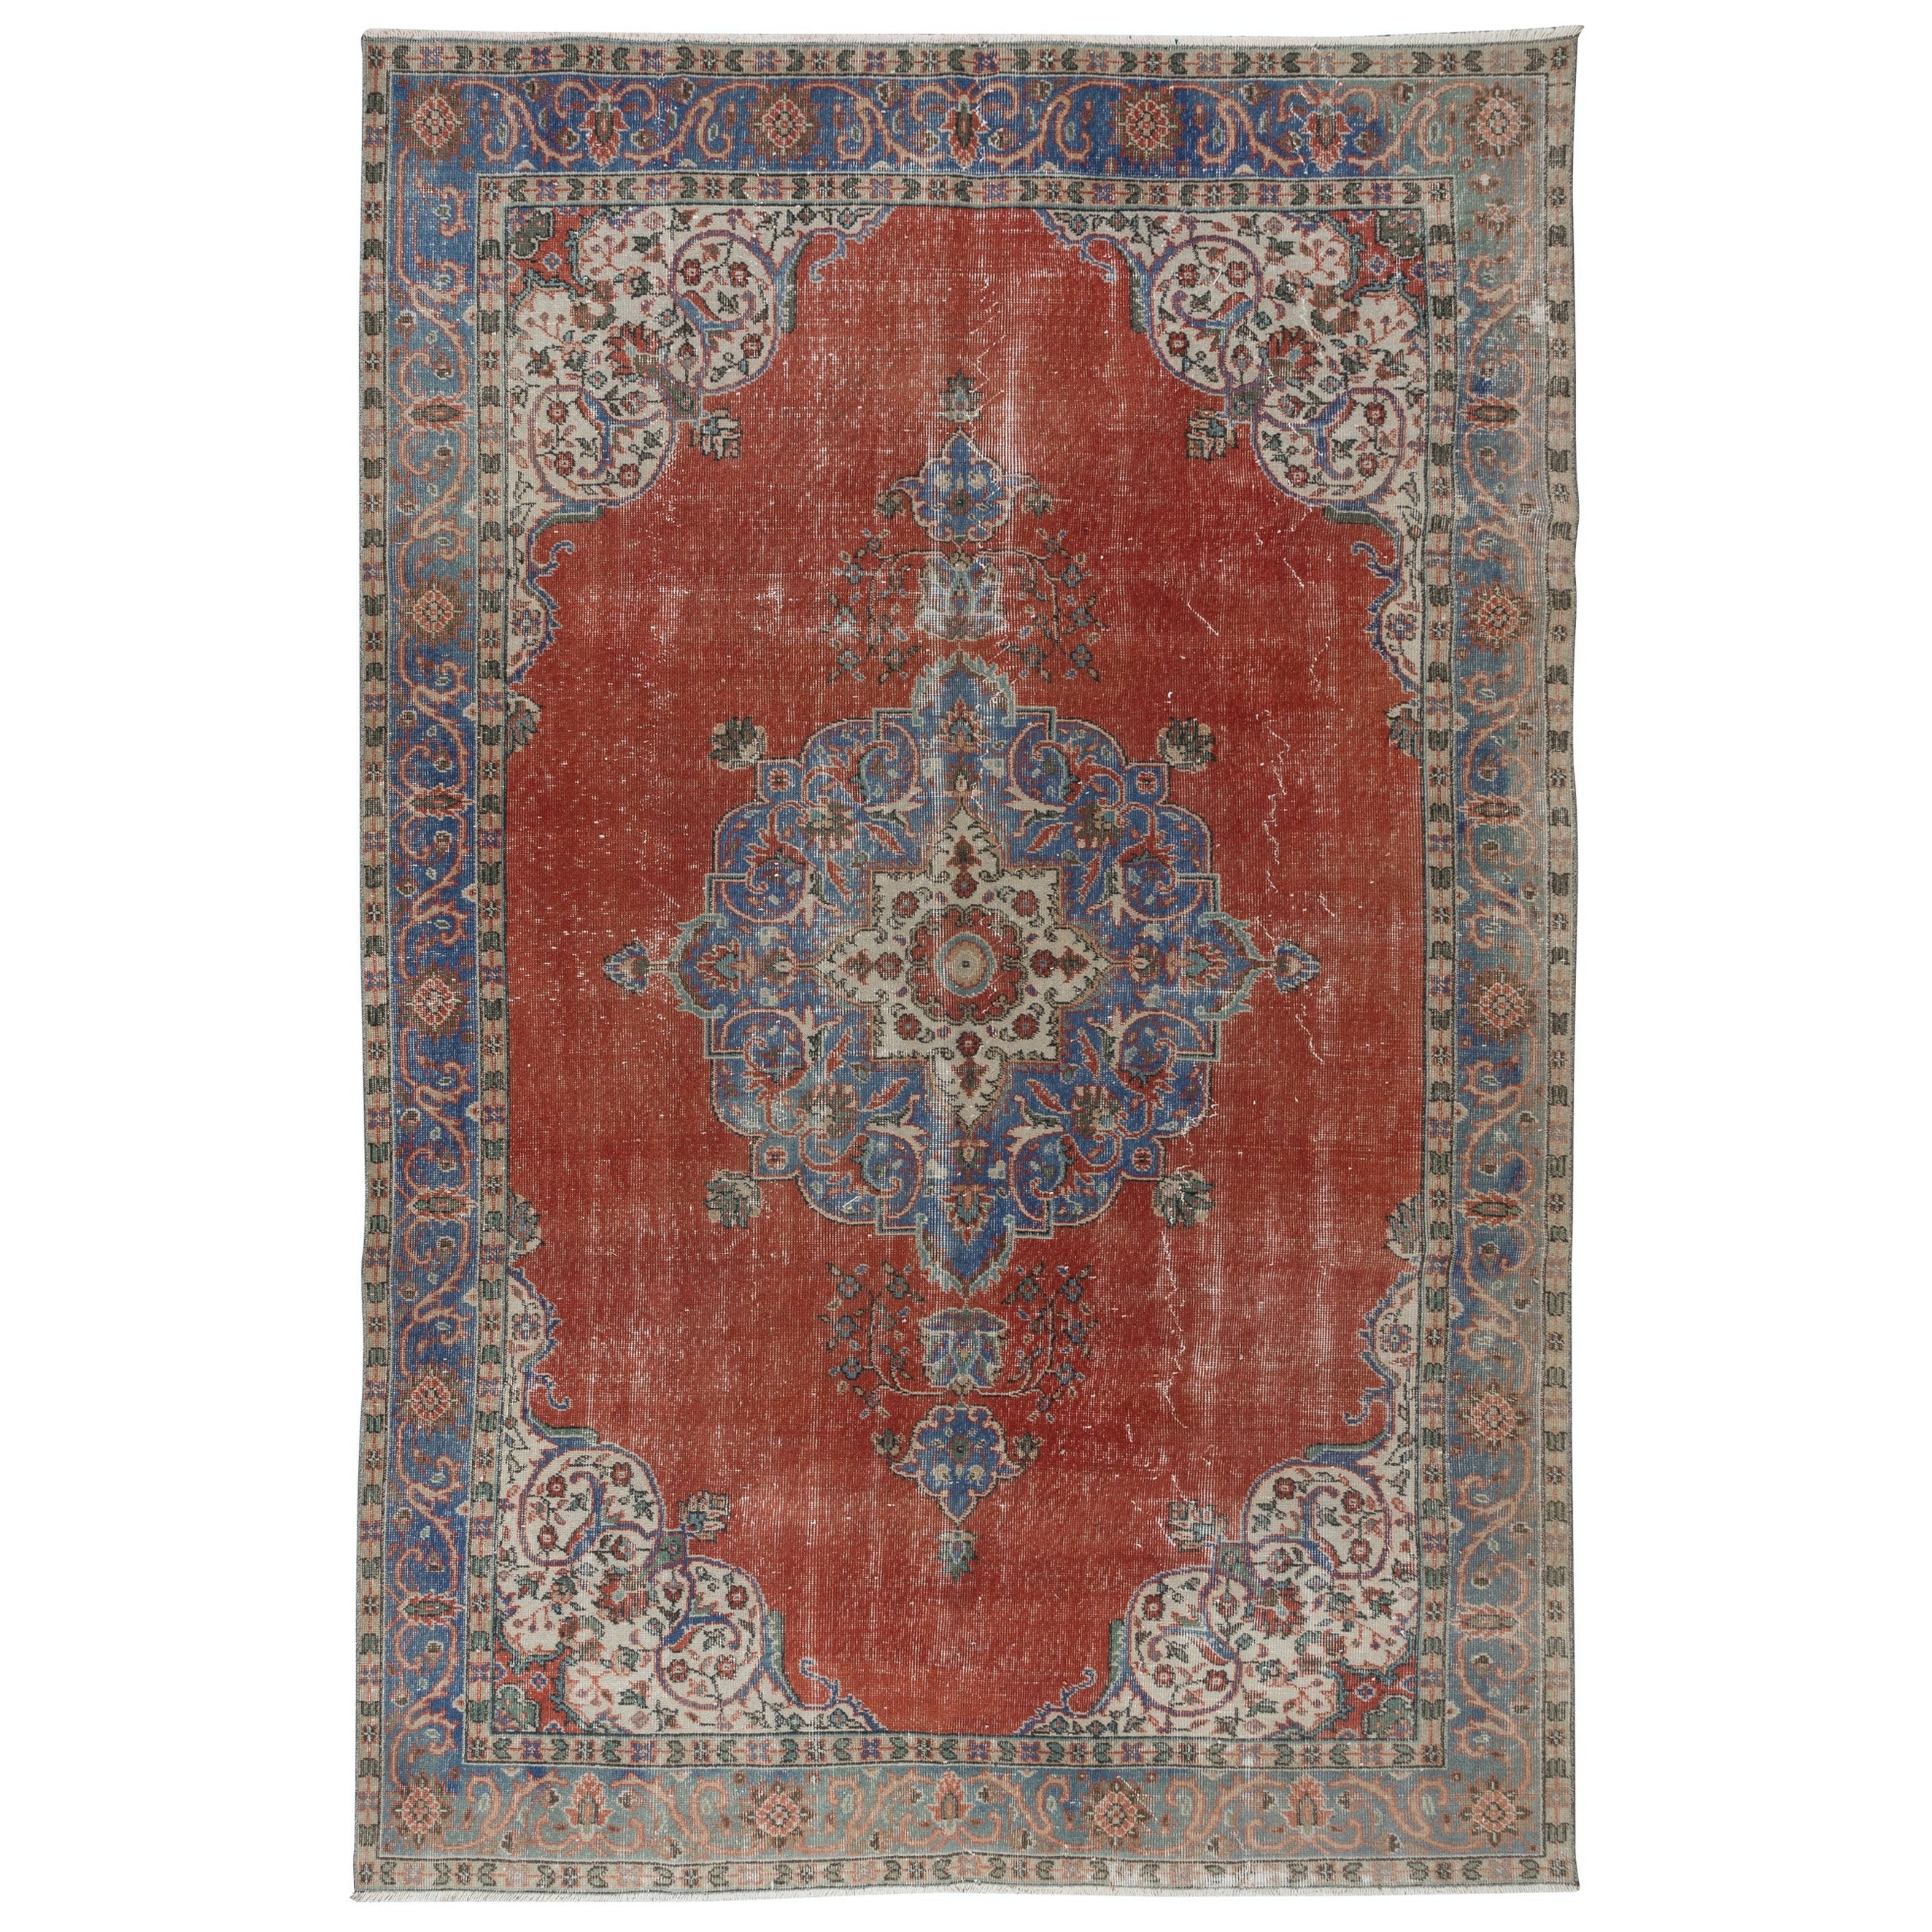 6.6x10 Ft One-of-a-kind Vintage Handmade Turkish Rug in Red, Navy Blue & Beige For Sale